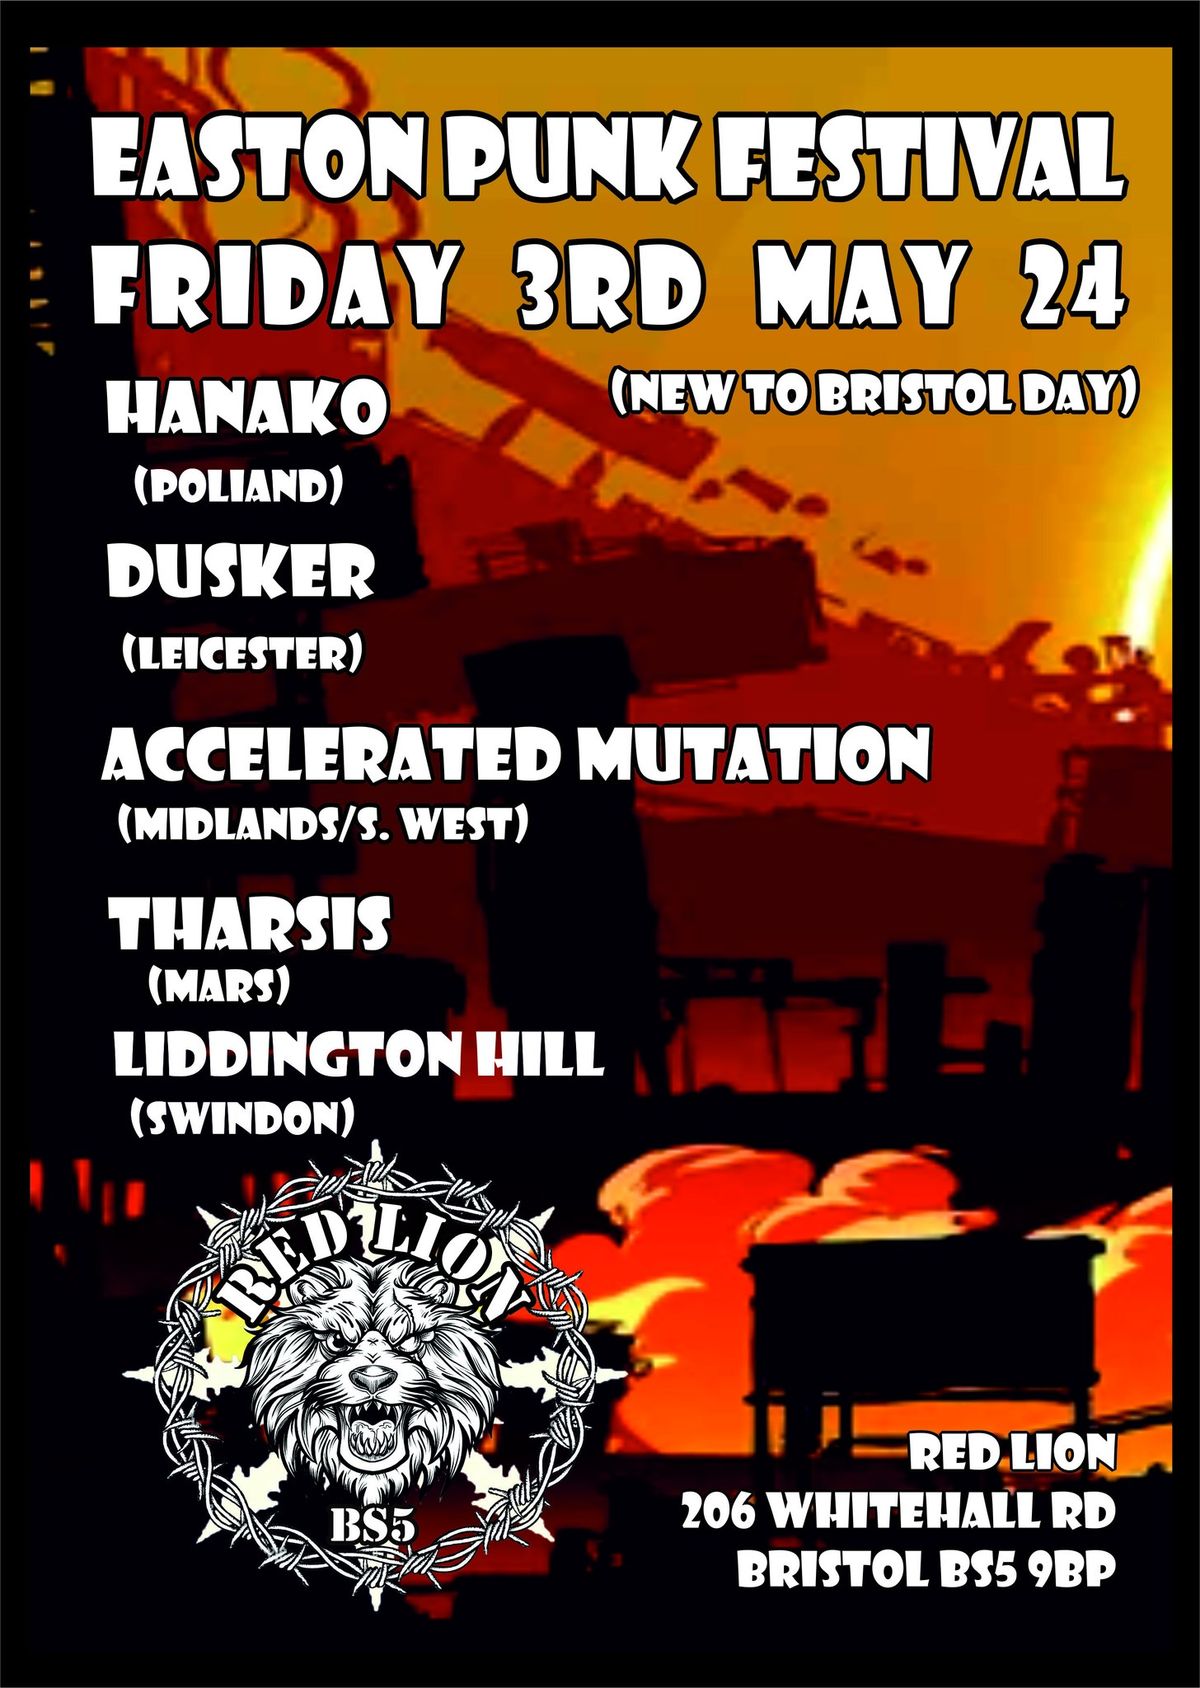 Easton Punk Festival - FRIDAY RED LION - New bands to Bristol